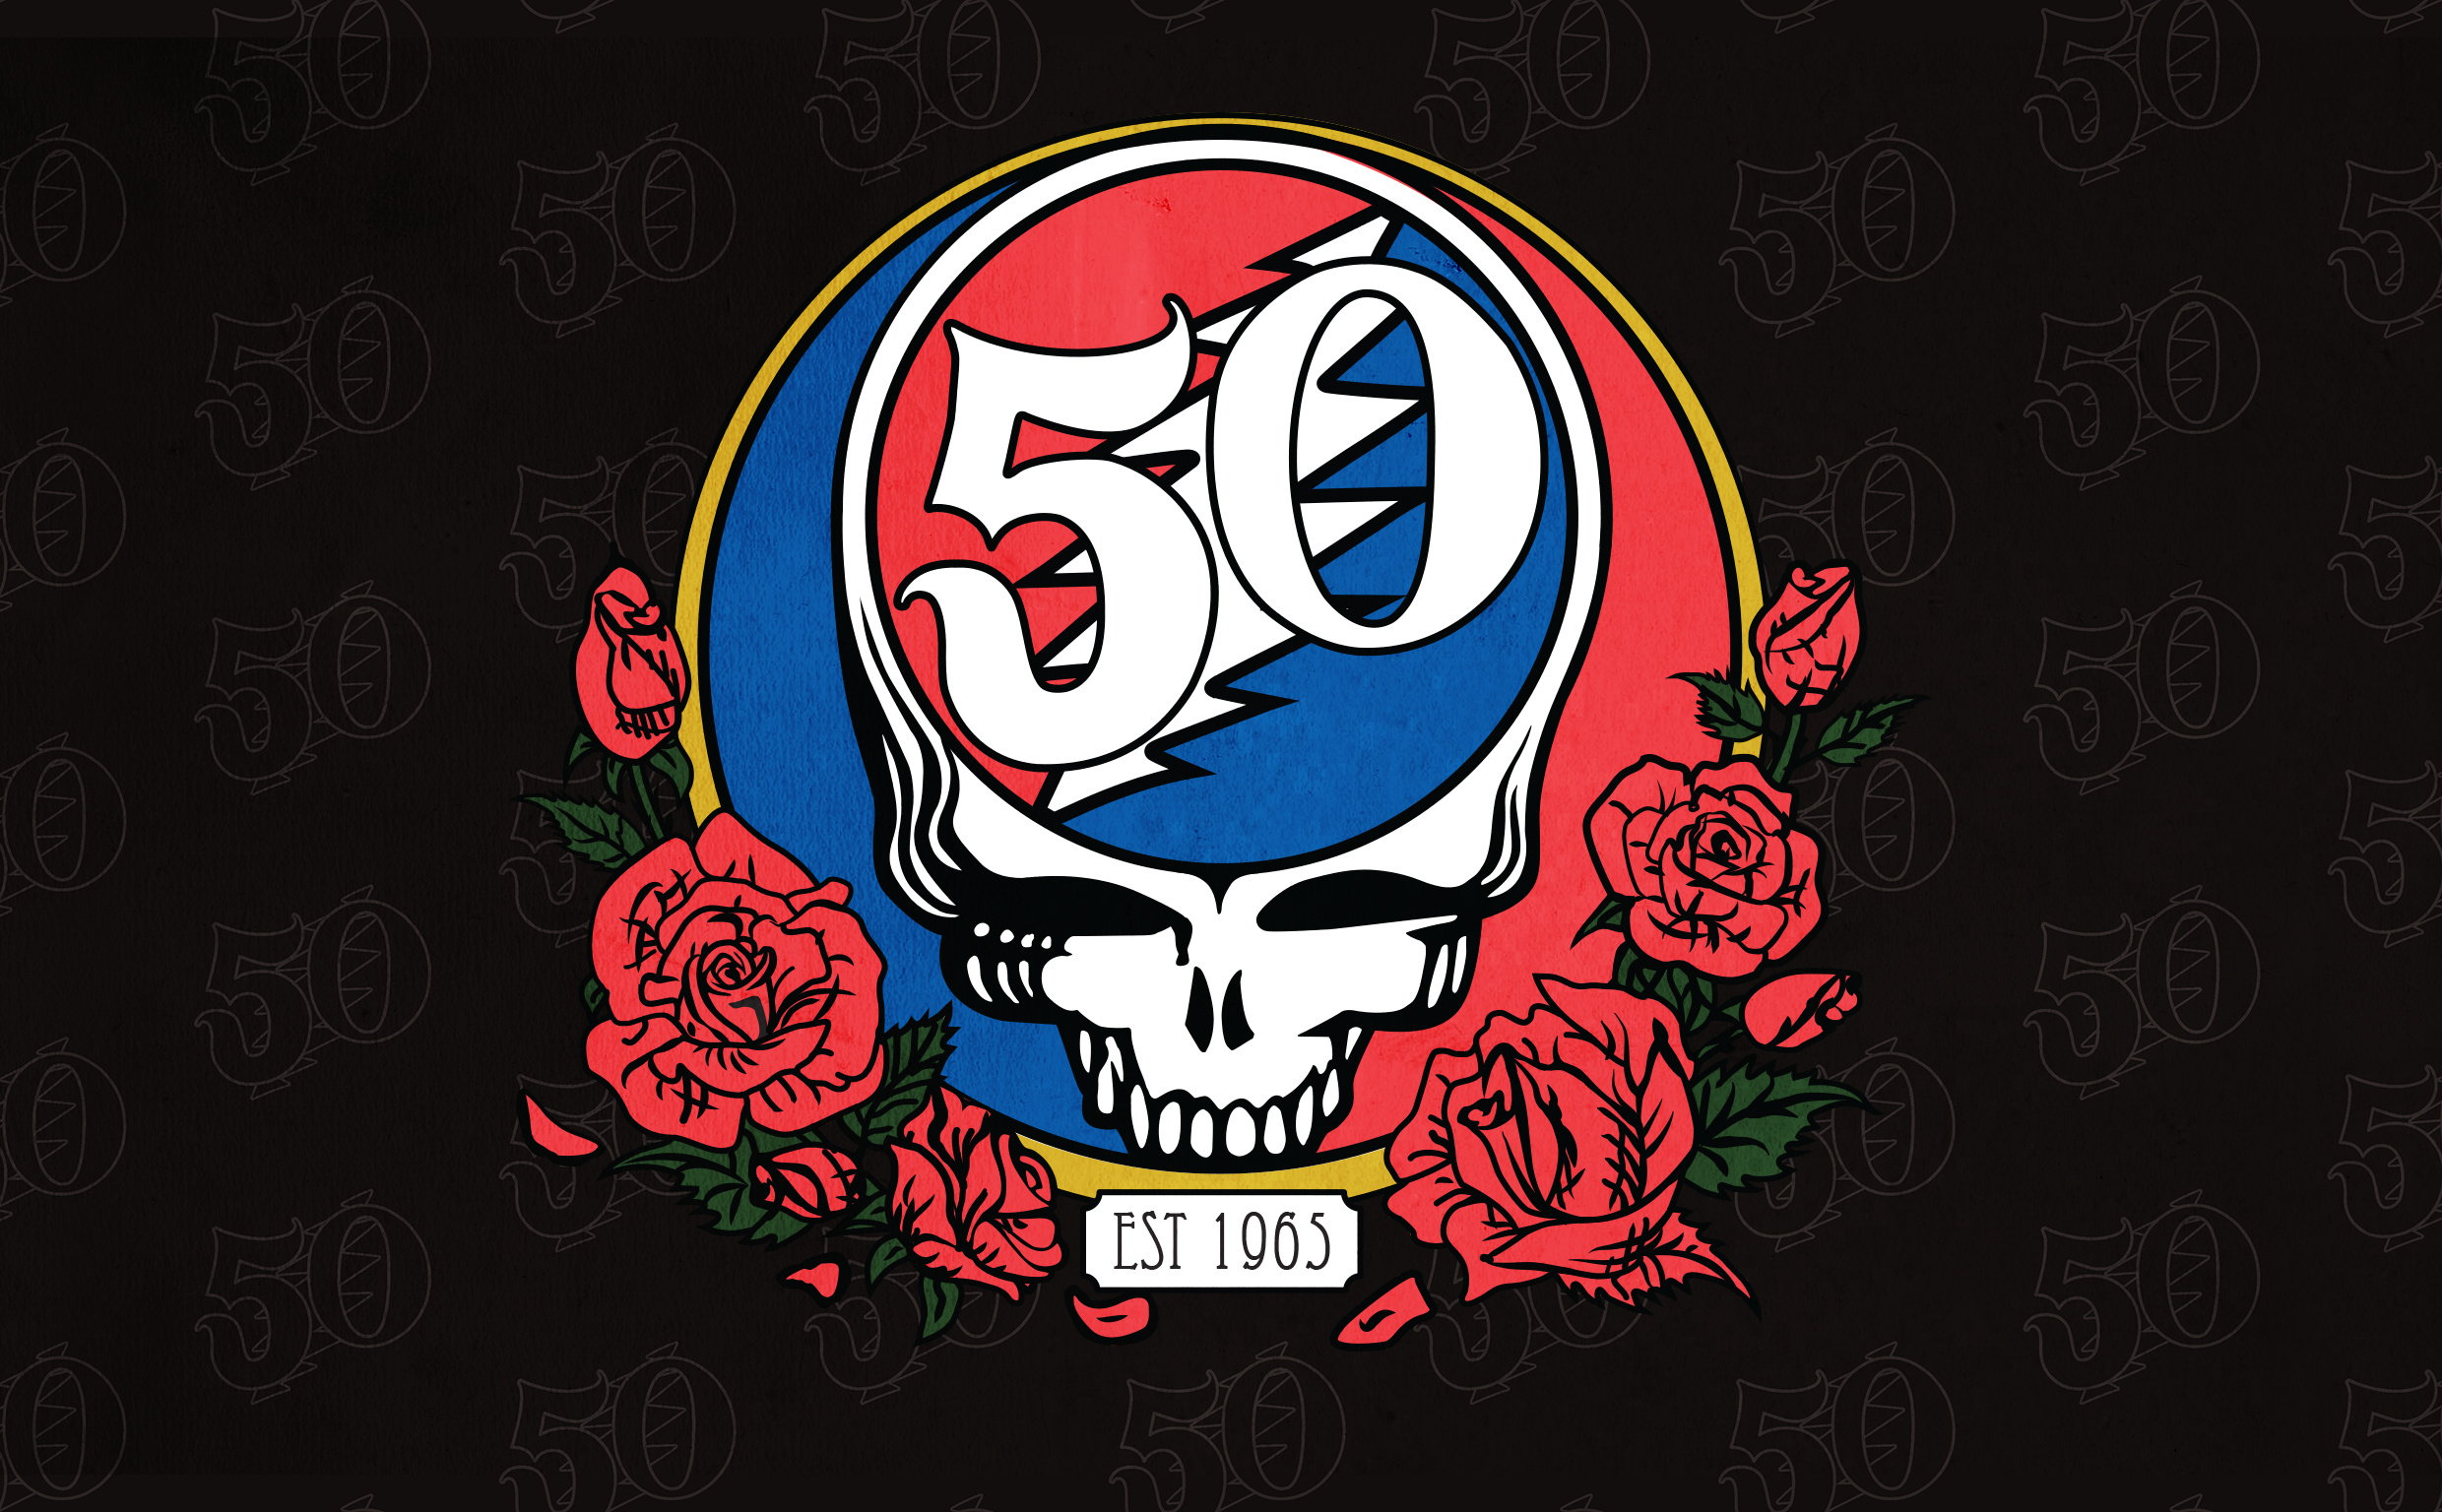 Grateful Dead: The American jam band, Inducted into the Rock and Roll Hall of Fame in 1994. 2480x1540 HD Wallpaper.